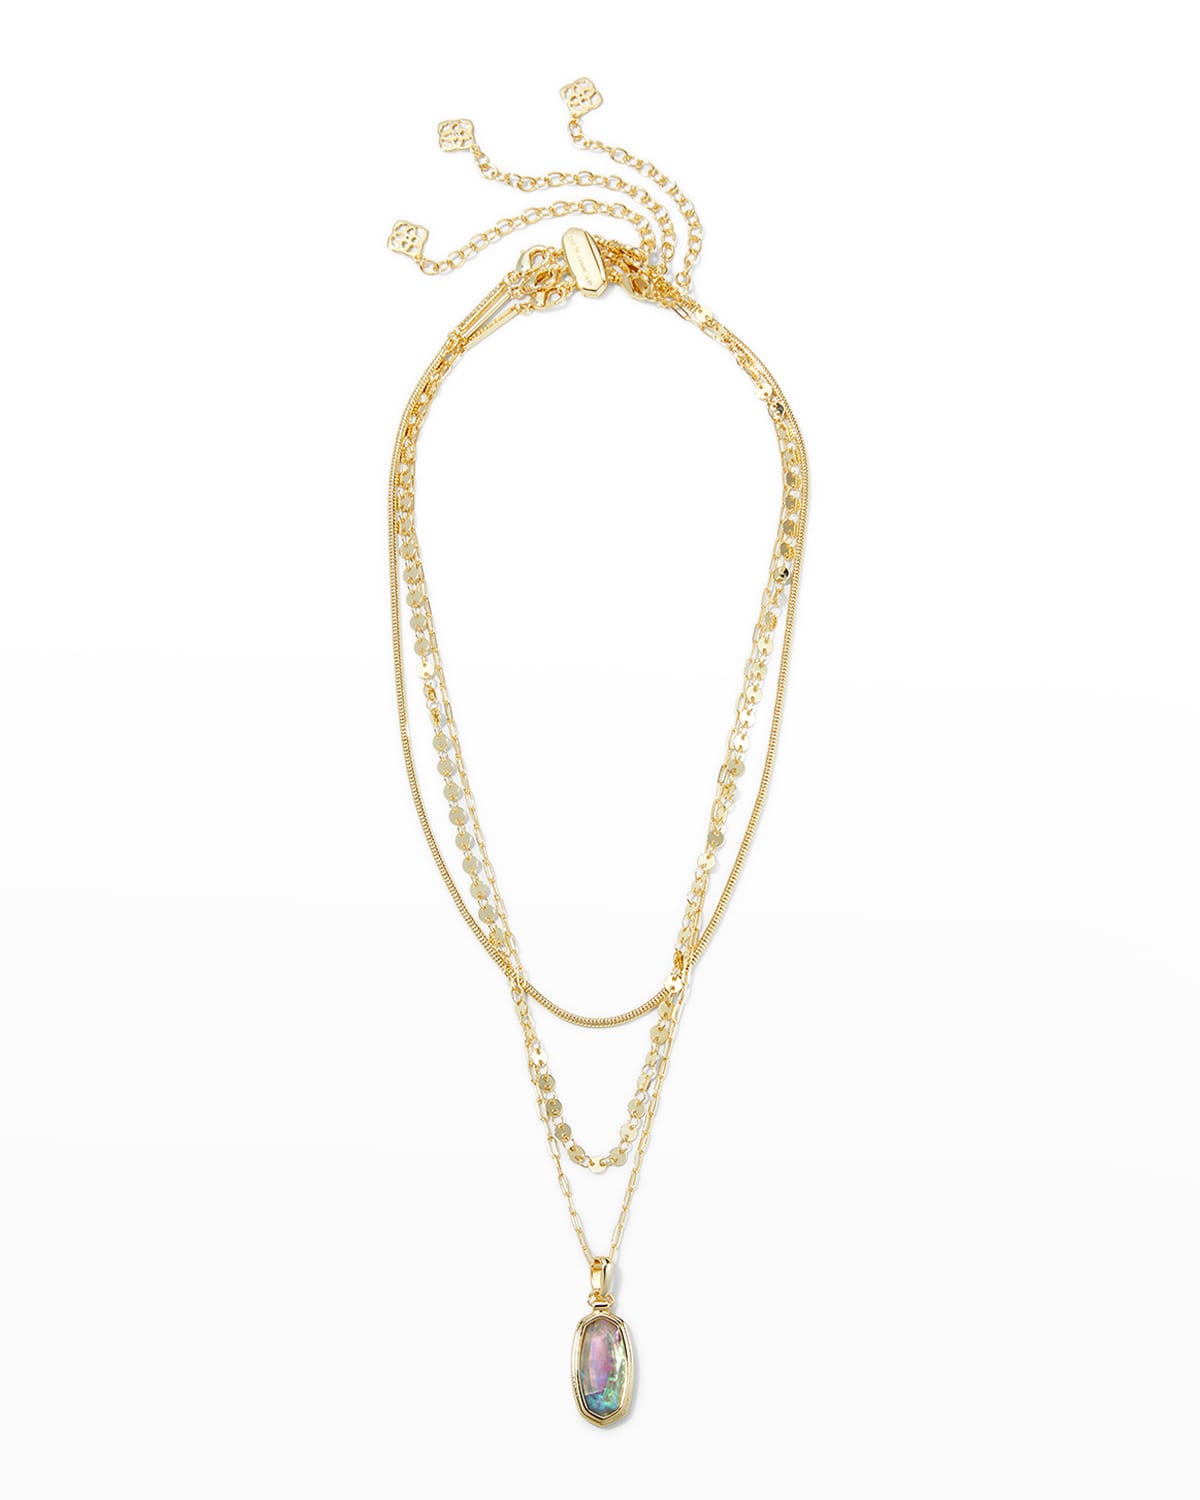 Brielle Convertible Gold Charm Necklace in Multi Mix